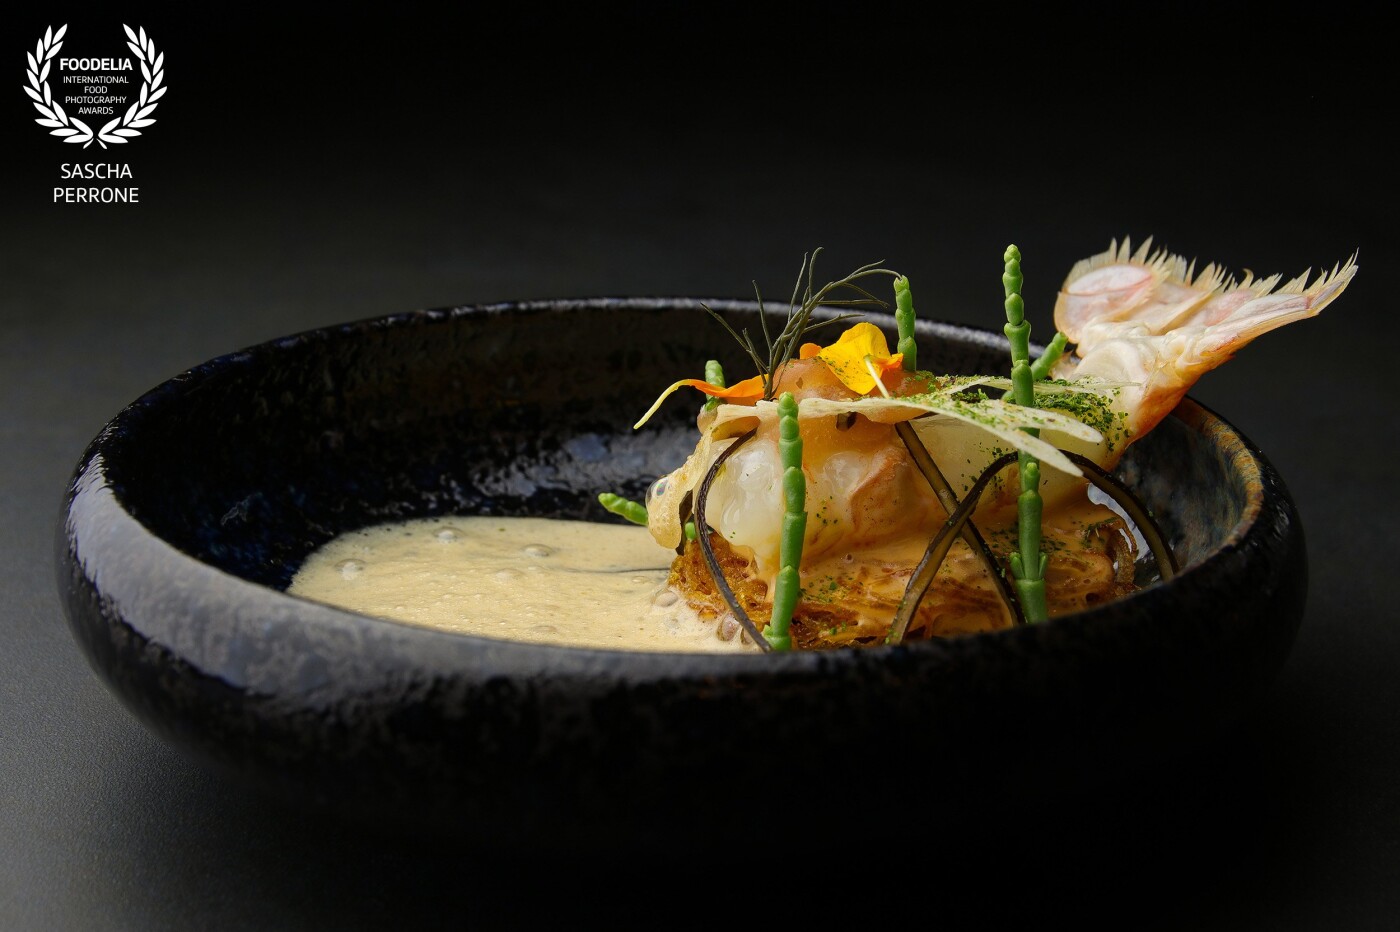 A dish with langostino by Chef Pierre Beckerling in the restaurant IUMA by Dyllong & De Luca in Dortmund - Germany. IUMA is a restaurant with an international atmosphere and cuisine inspired by Japan, which also remains true to the products from the local region.